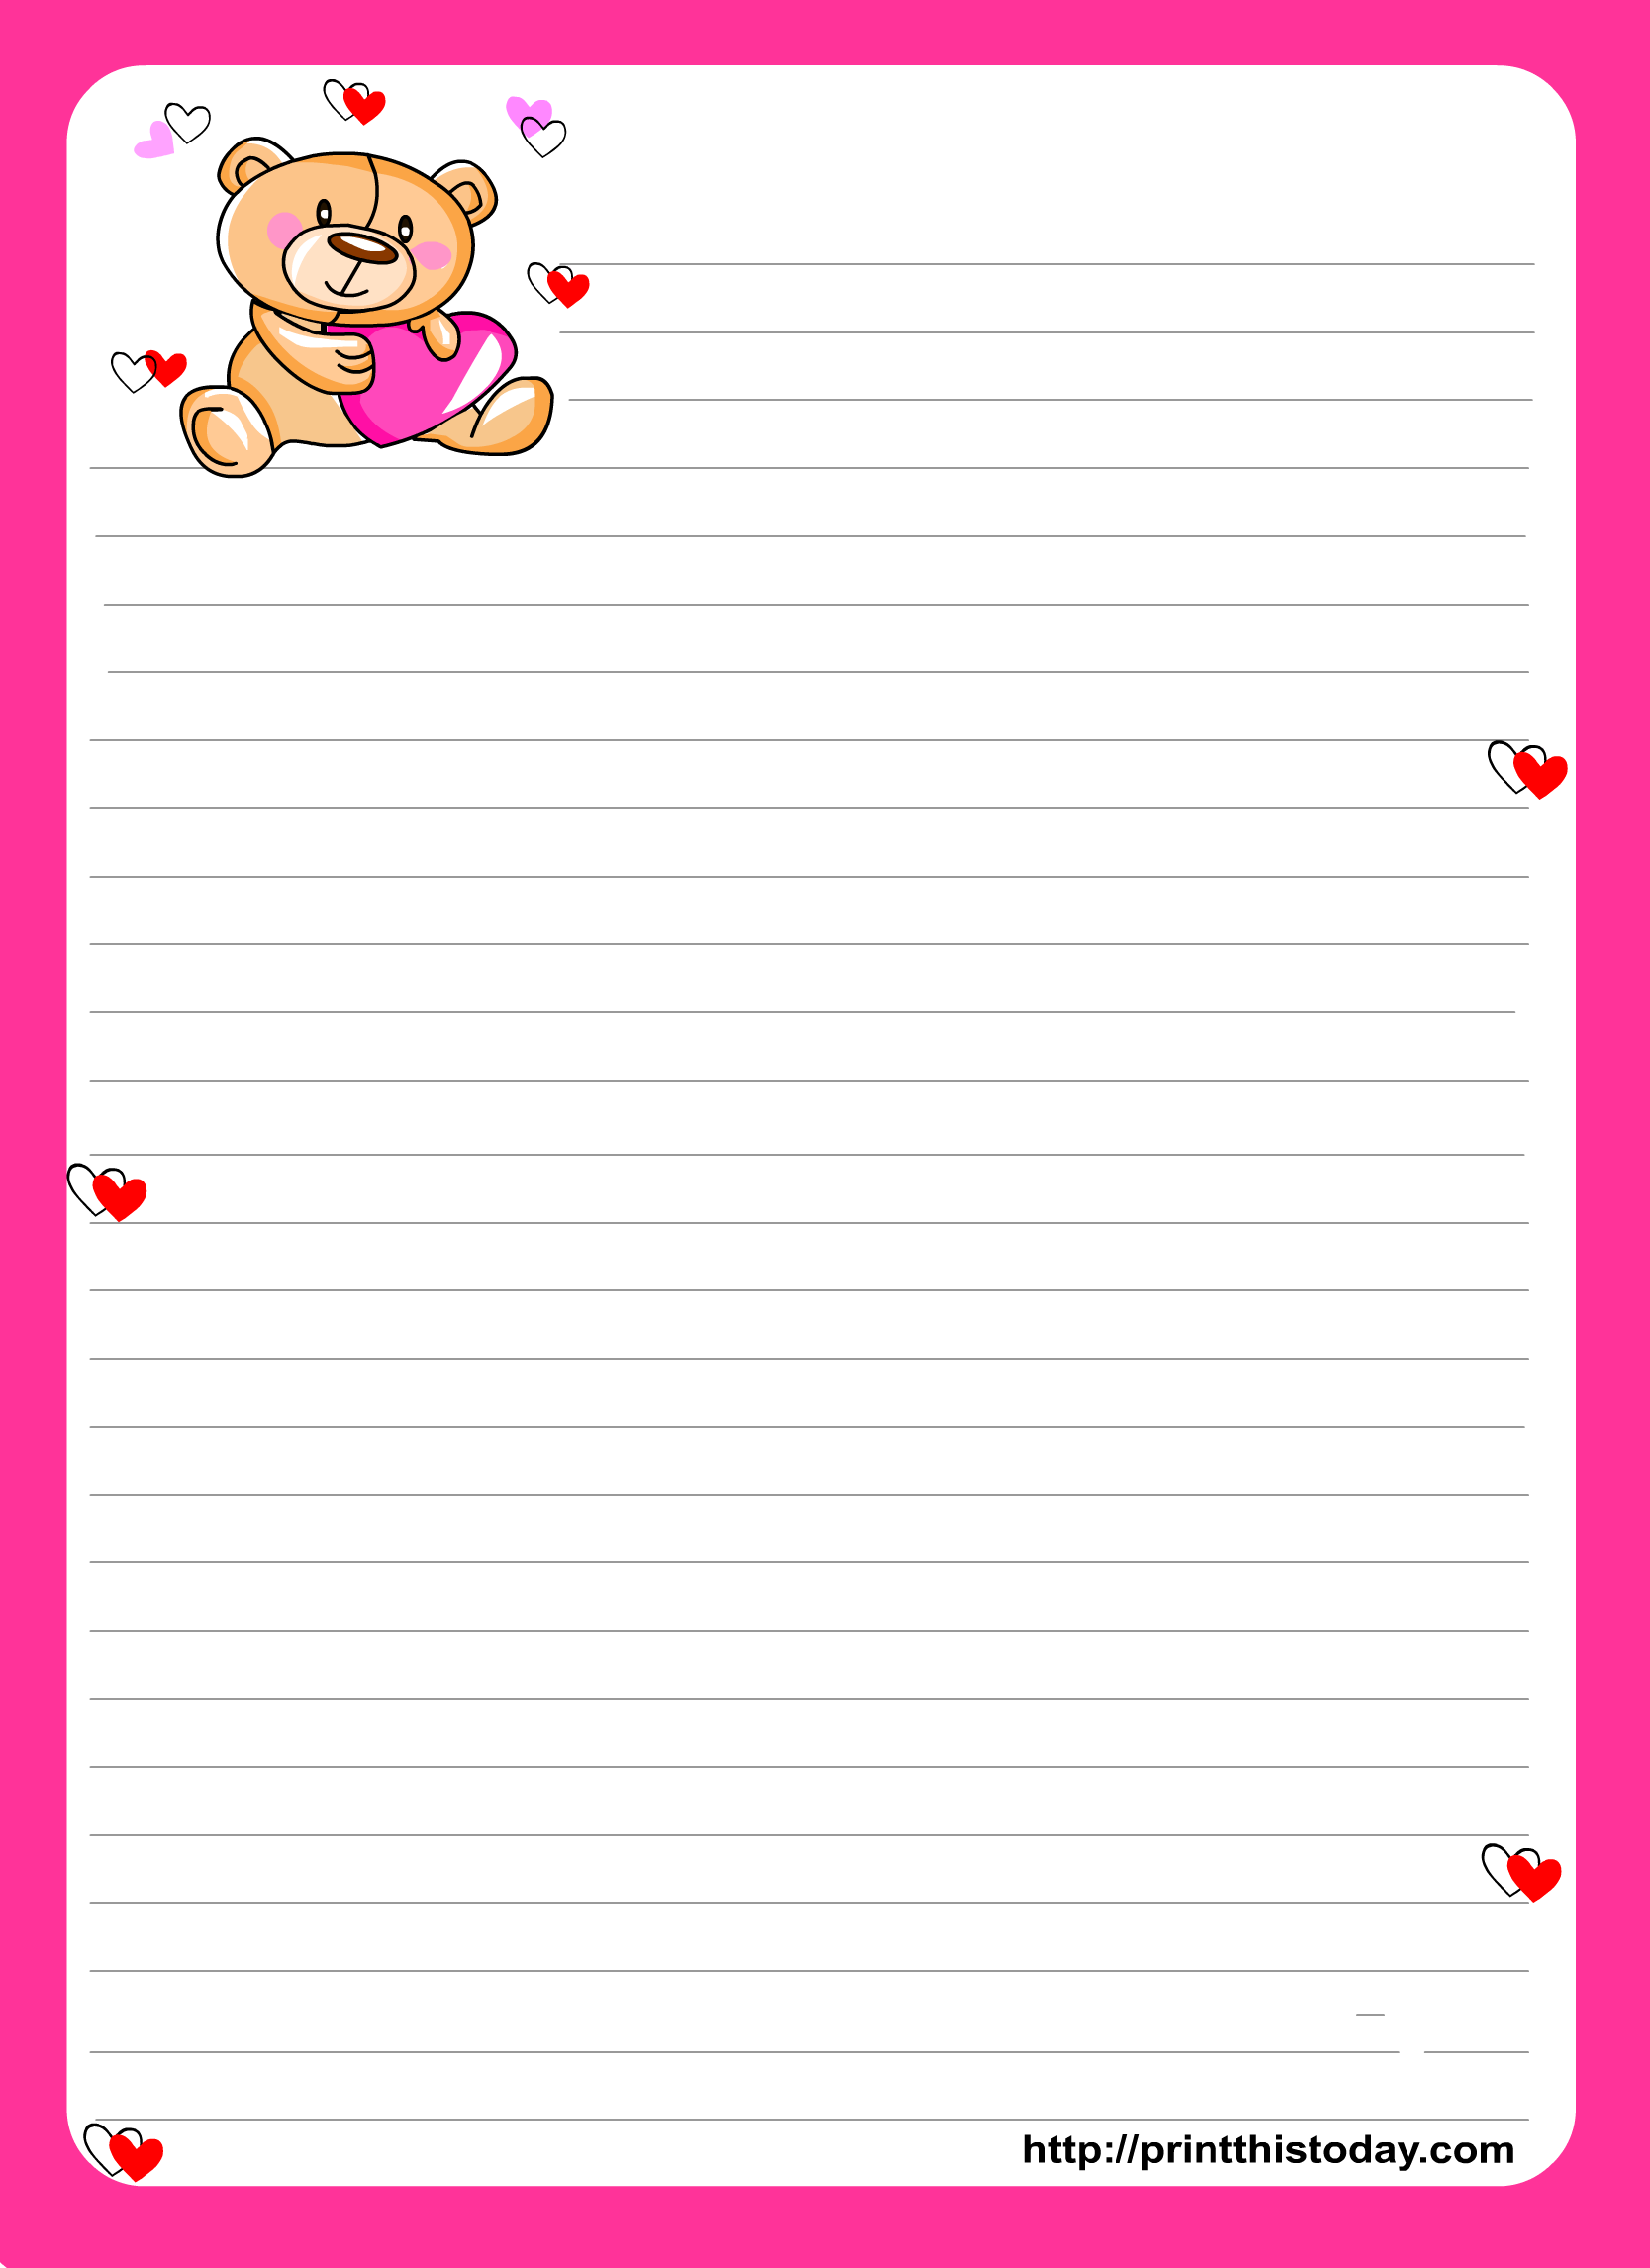 printable-lined-paper-for-letter-writing-discover-the-beauty-of-printable-paper